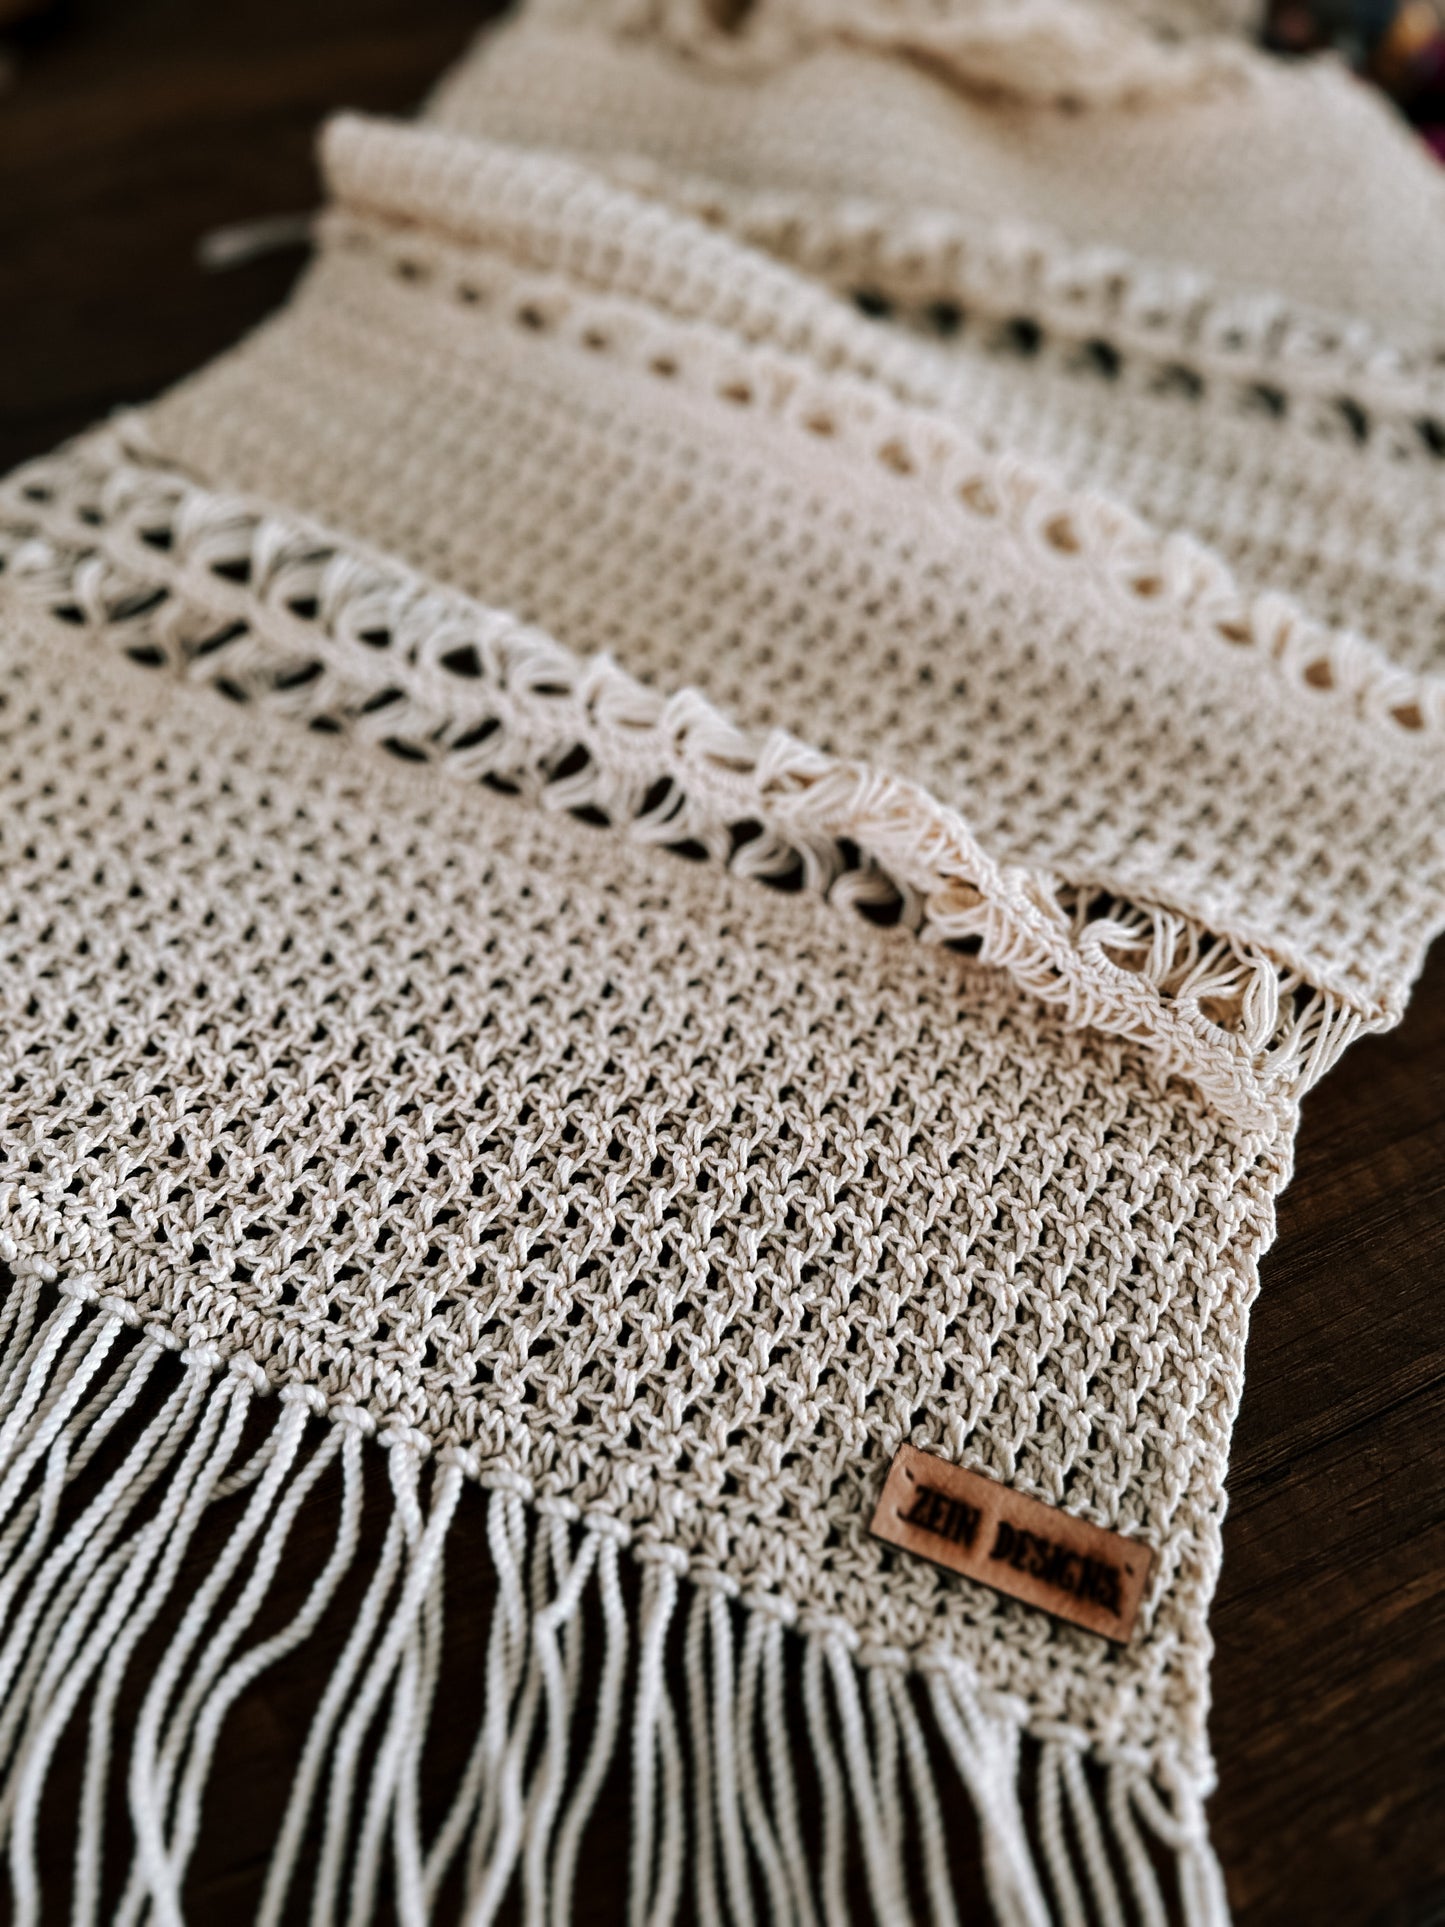 Cotton Stitches Table Runner